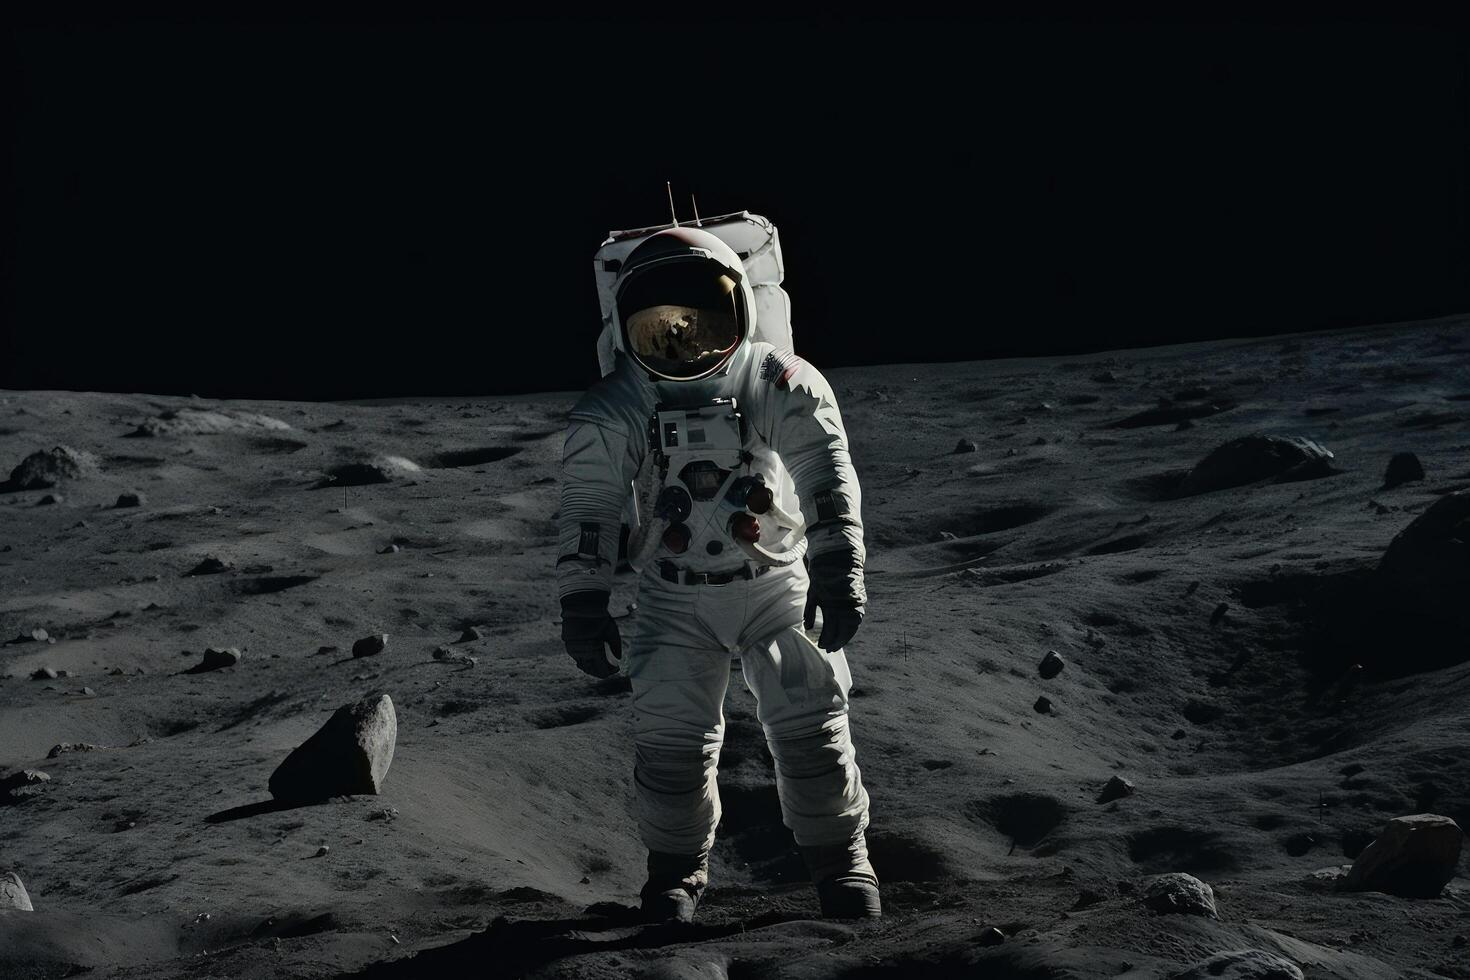 Astronaut on the moon. Astronaut in outer space. Astronaut in space suit walking on moon surface, photo